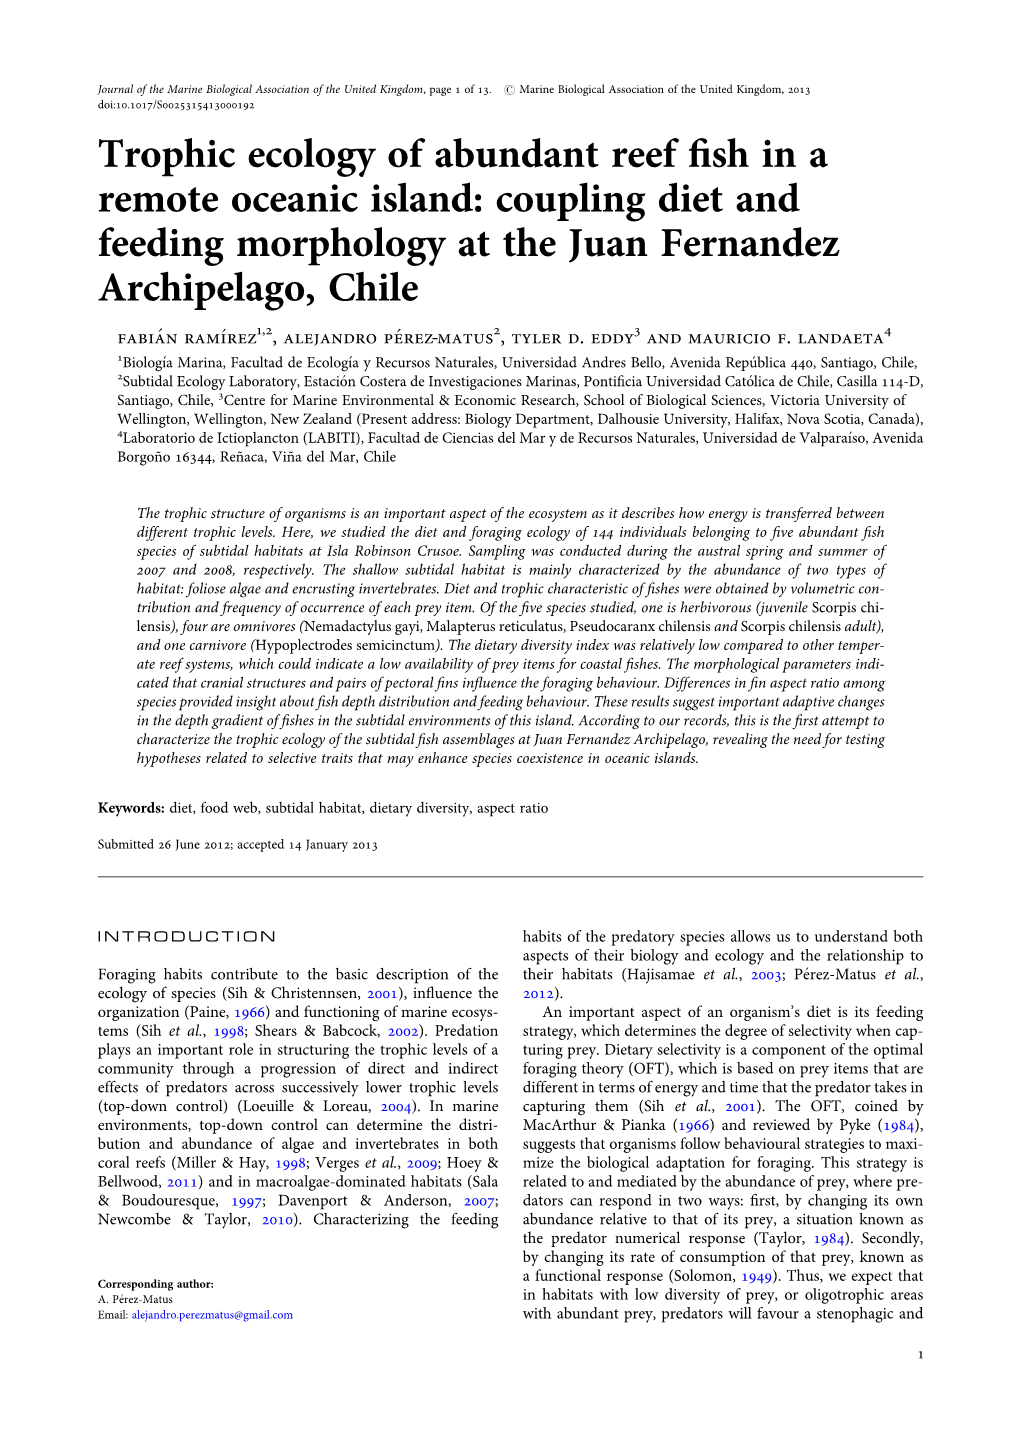 Trophic Ecology of Abundant Reef Fish in a Remote Oceanic Island: Coupling Diet and Feeding Morphology at the Juan Fernandez